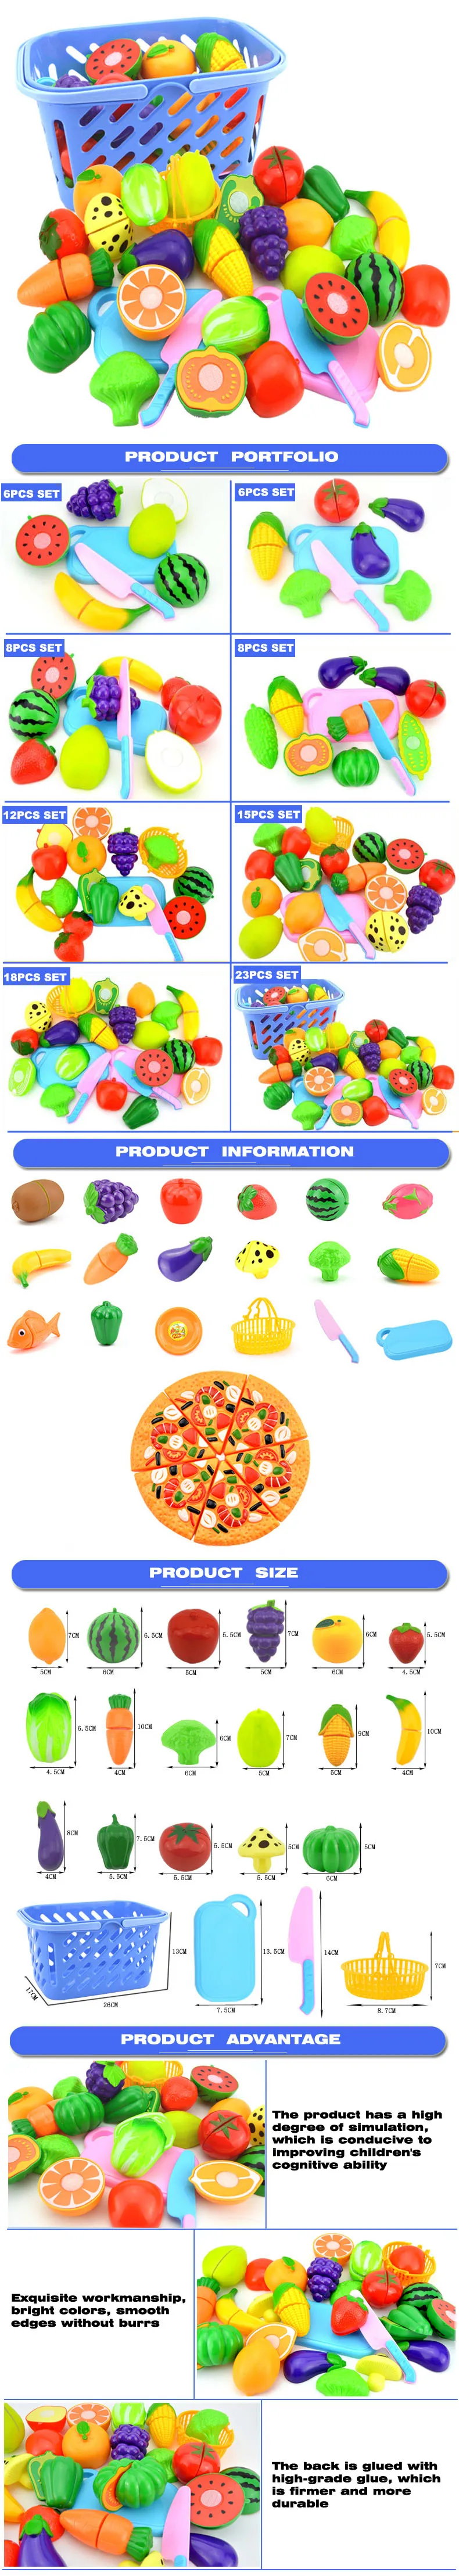 Wholesale Manufacture Custom Safety Children Kitchen Fruit Refrigerator Sets Toys Cutting Fruit And Vegetable Toy Pretend Play